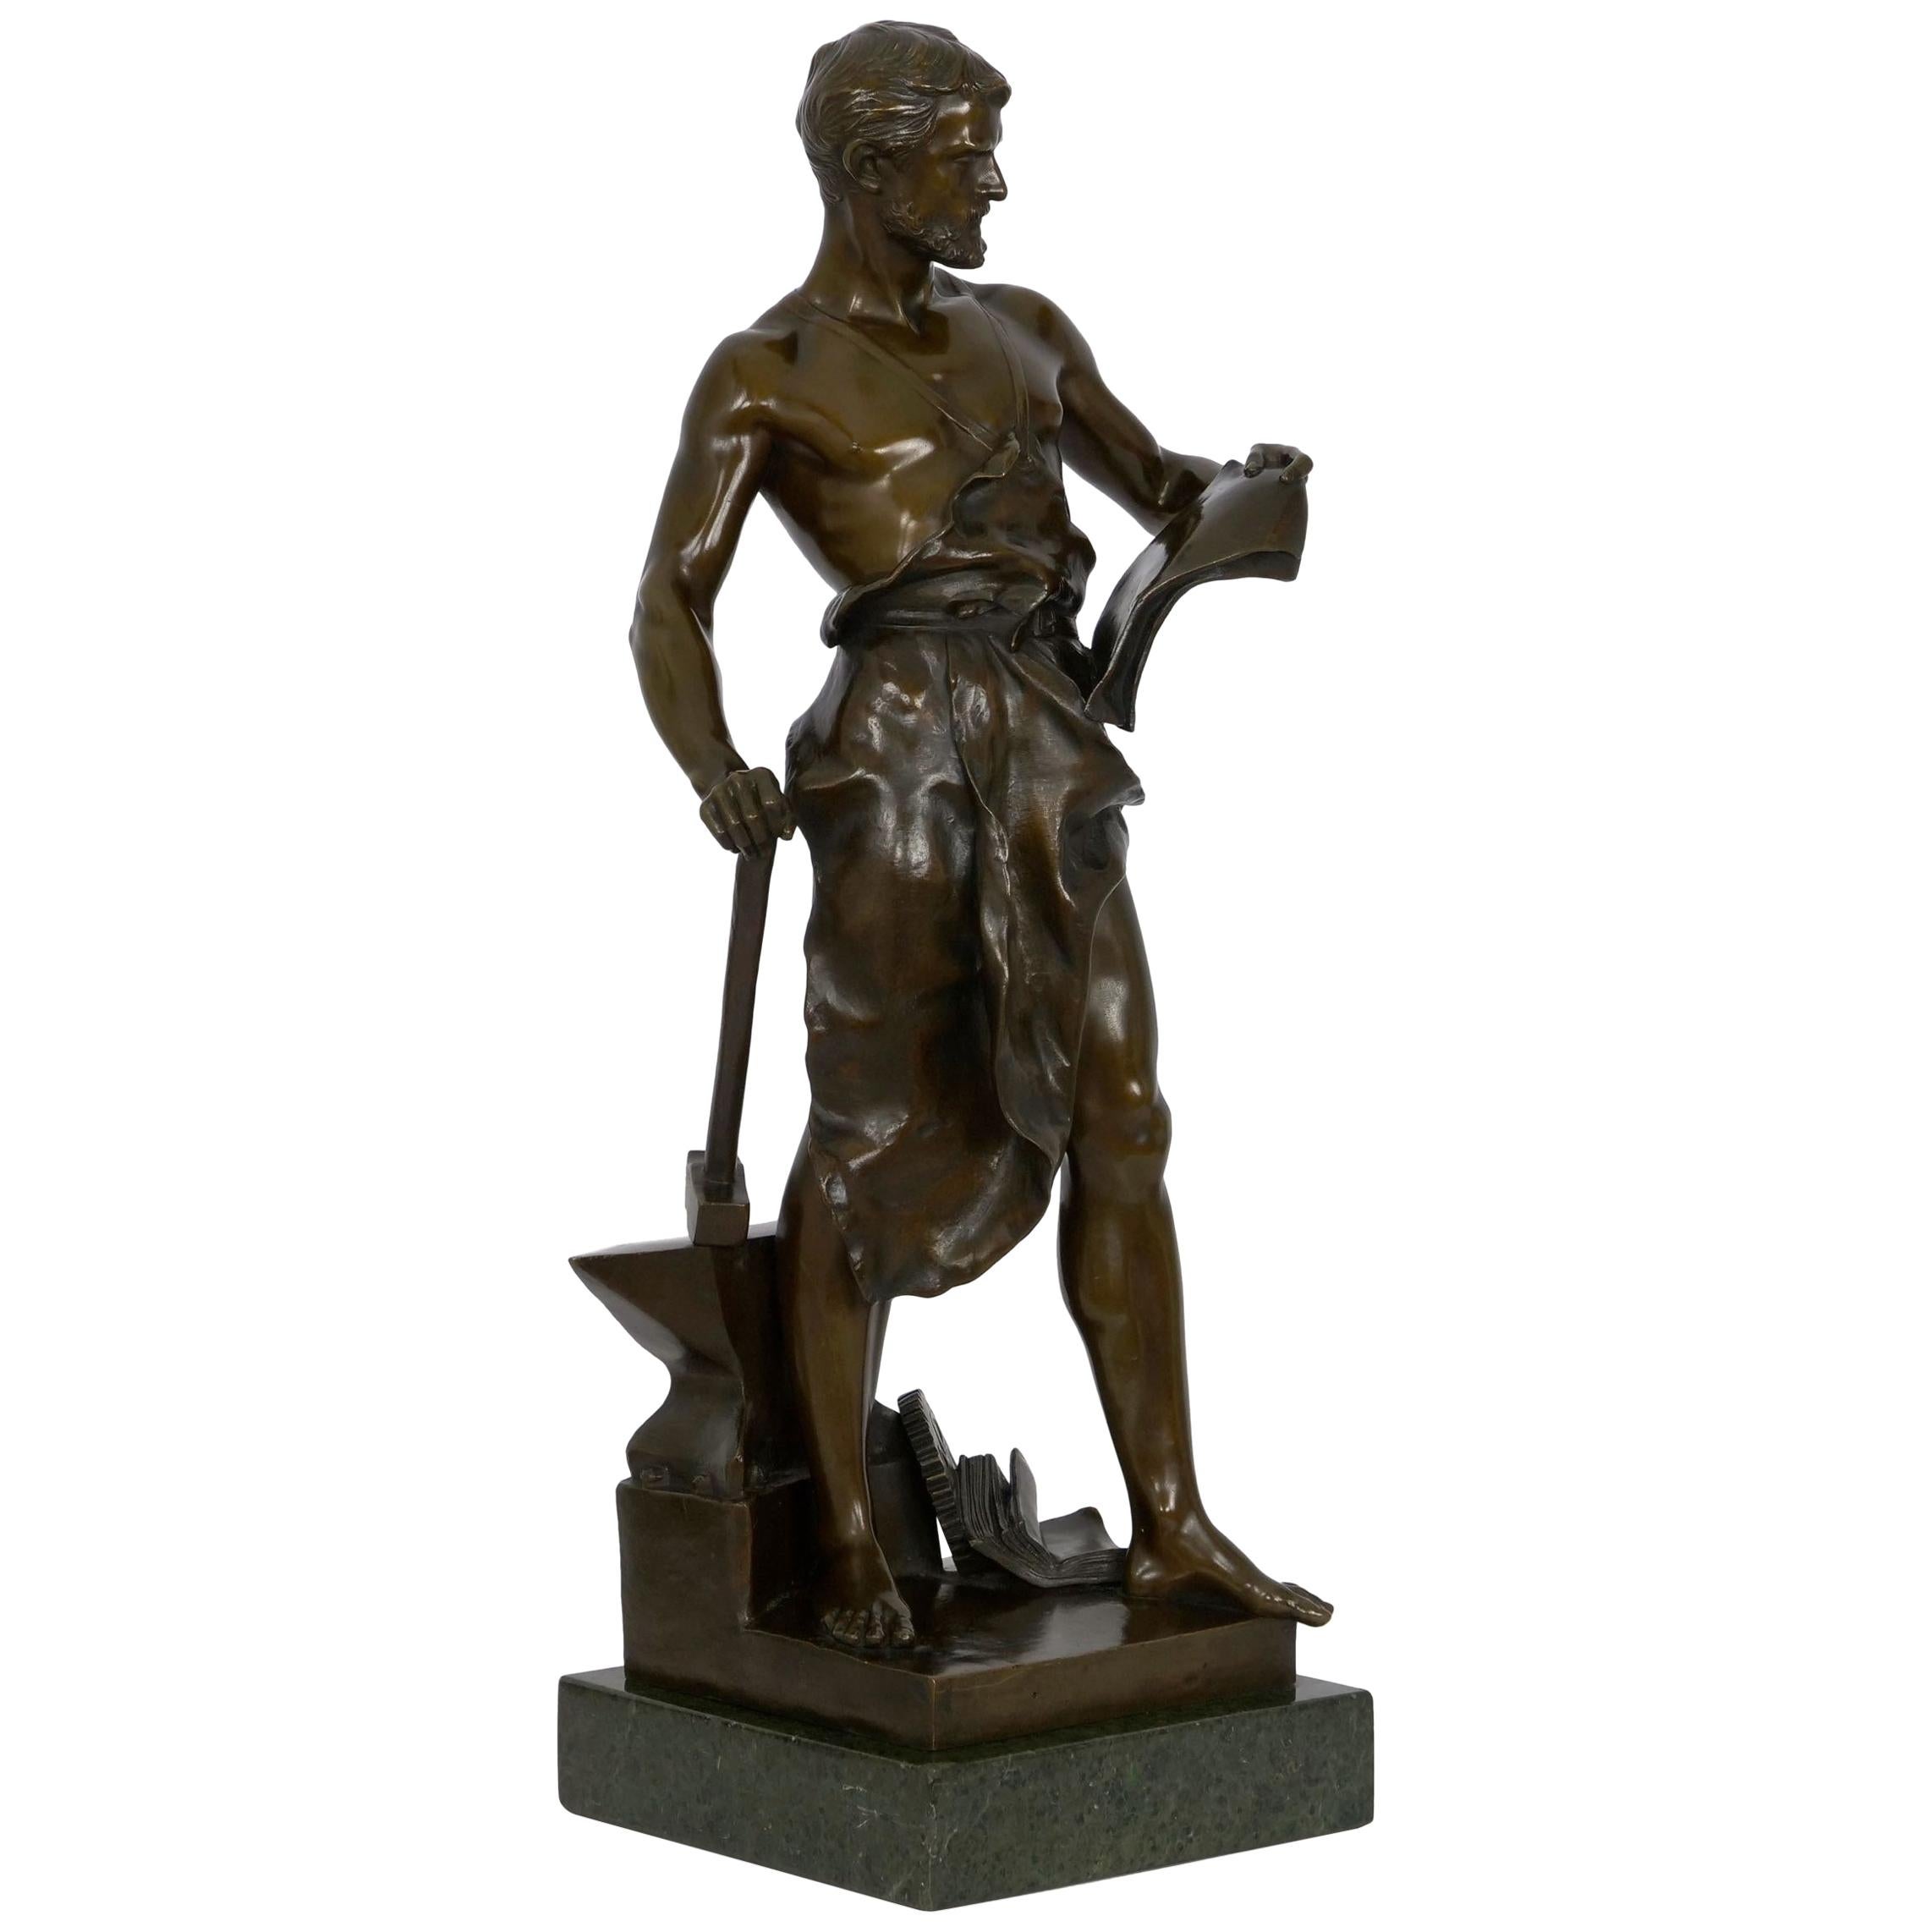 “Le Forgeron” French Bronze Sculpture of Blacksmith by Jean-Baptiste Germain